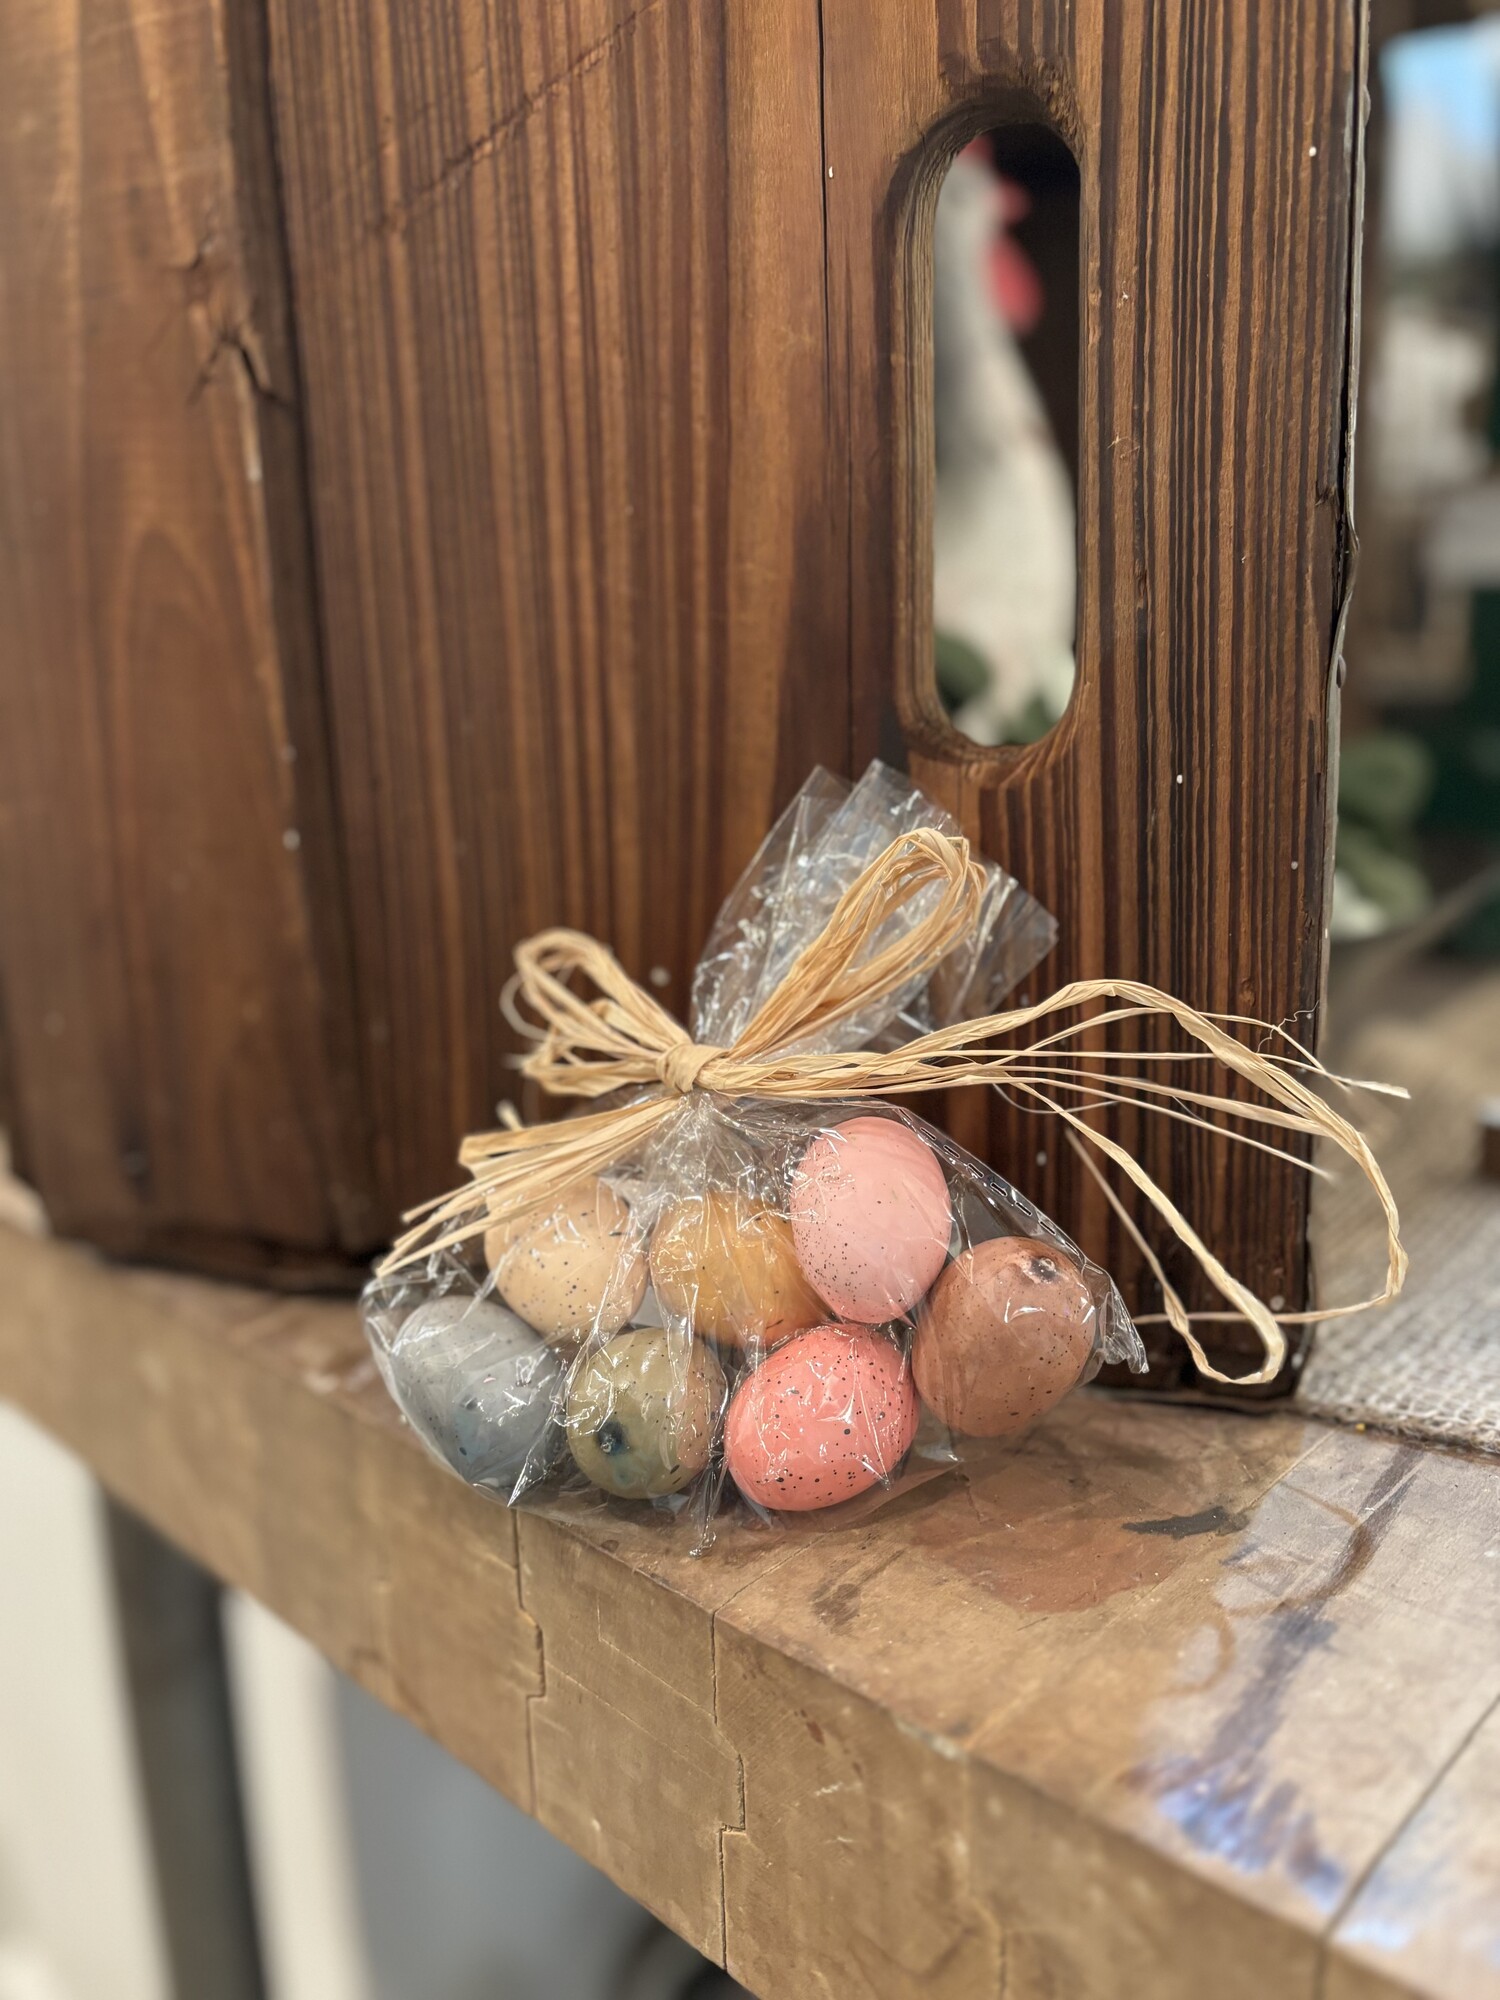 Bag of 7 speckeled spring colored eggs and measure 1.5 inches in diameter
Add these eggs to your spring or easter decor for a festive feel